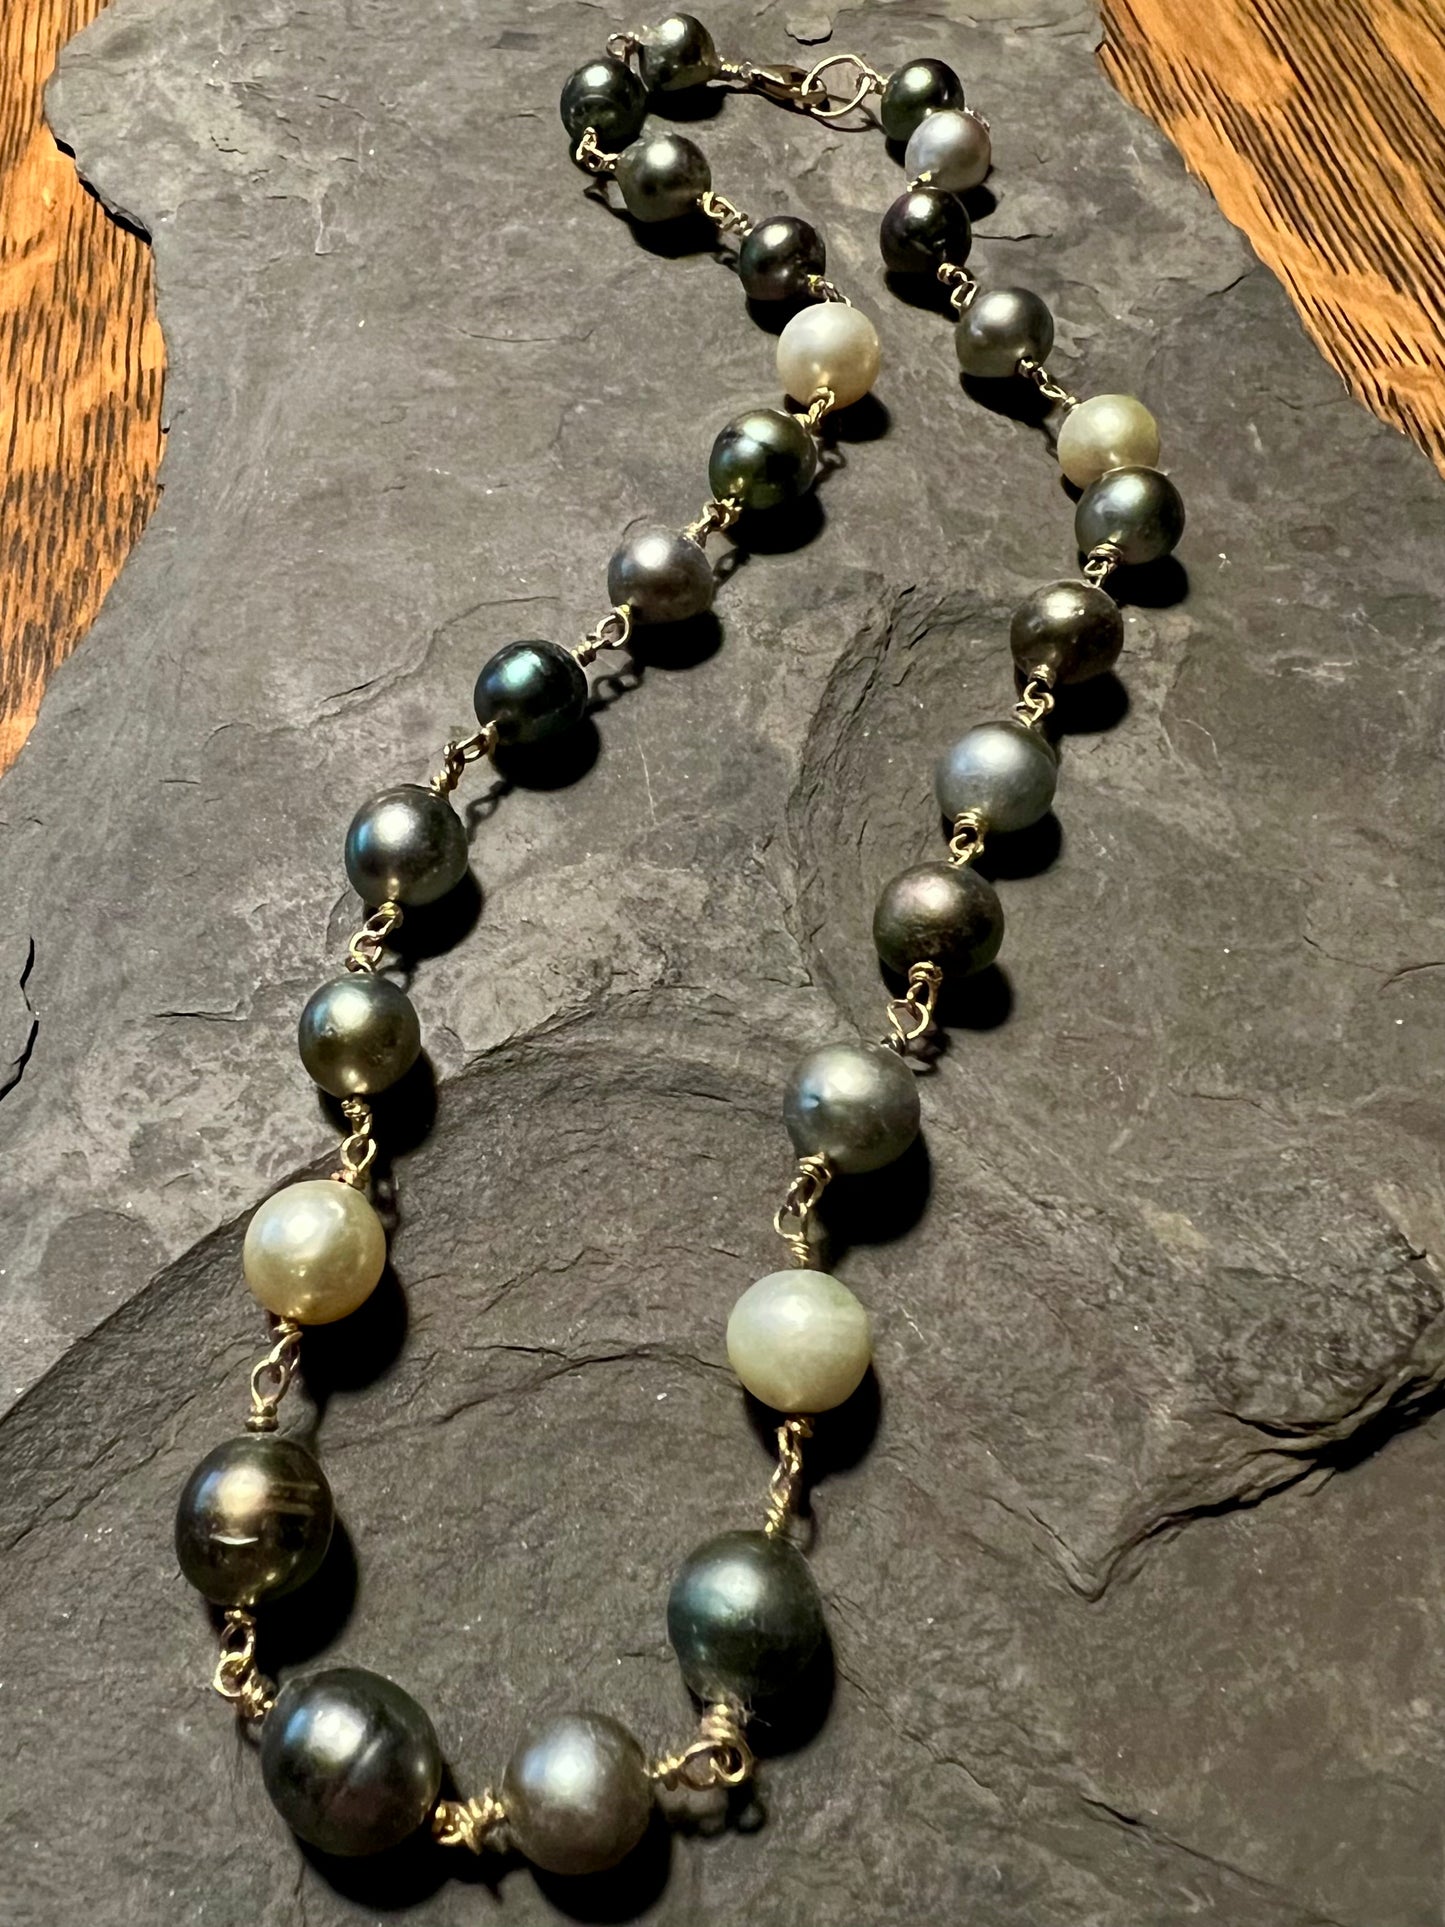 Stormy Tahitian Pearl Necklace - One of a Kind